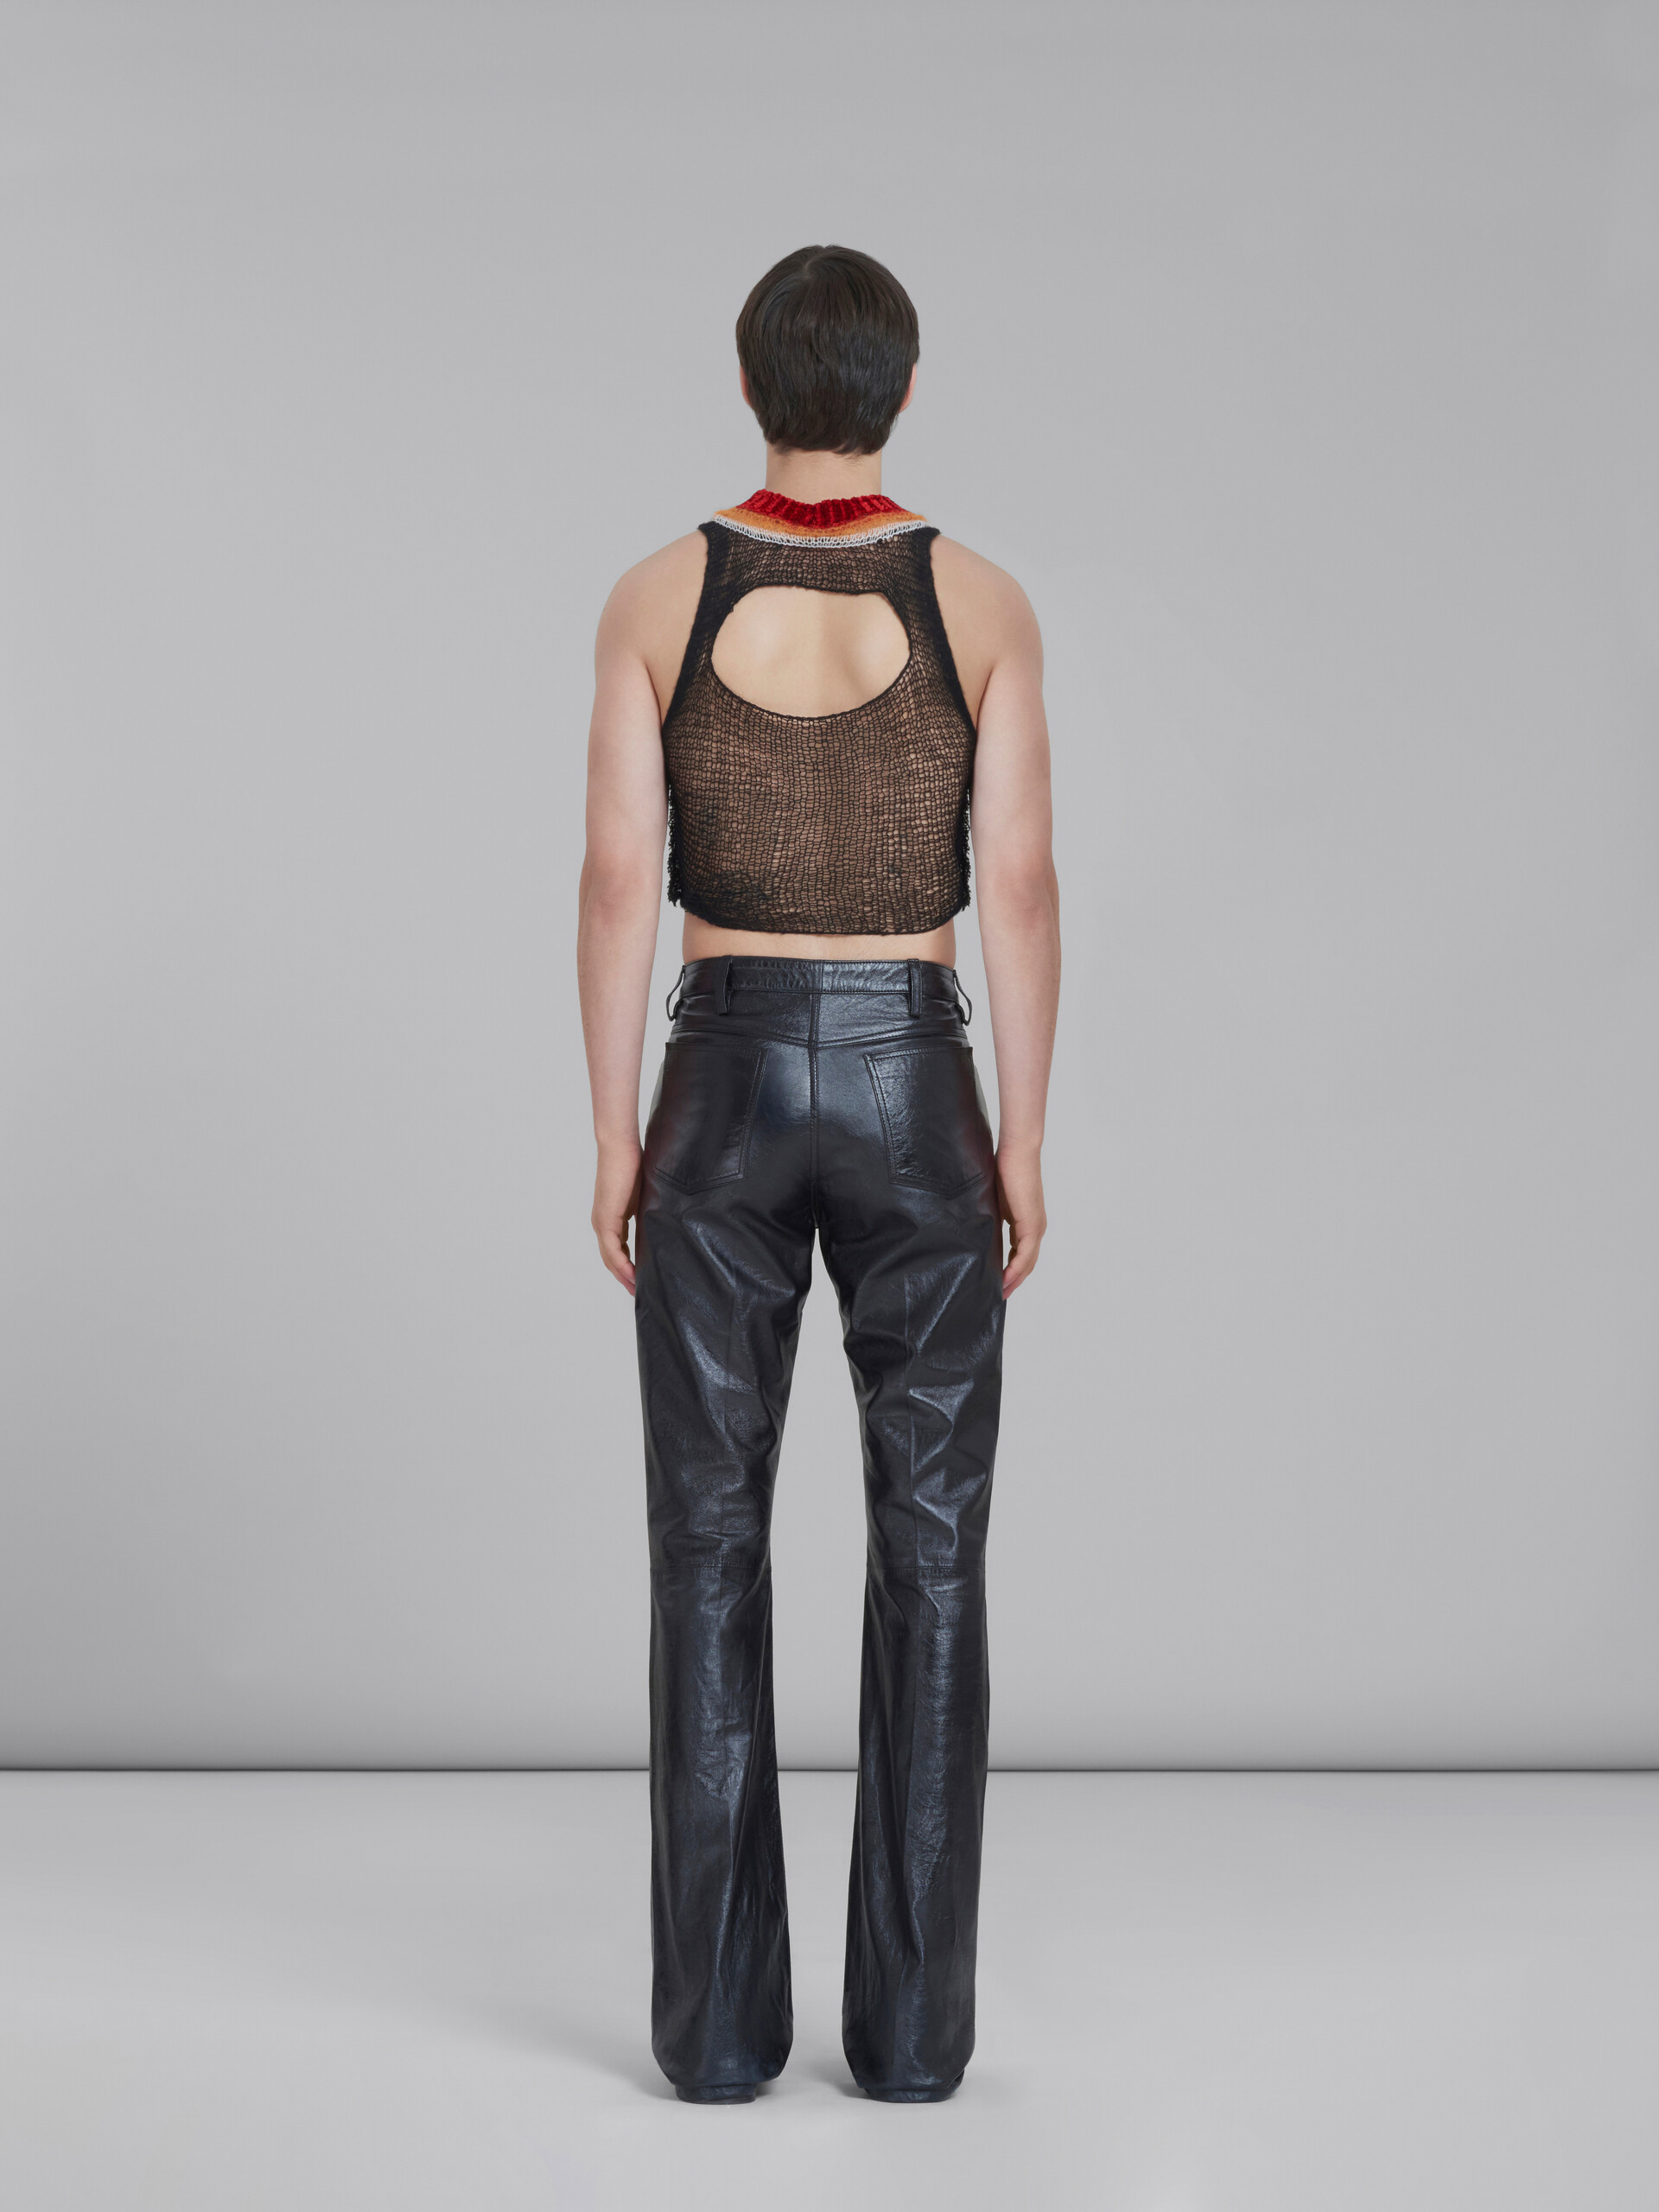 Black flared trousers in ultralight naplak leather - Pants - Image 3